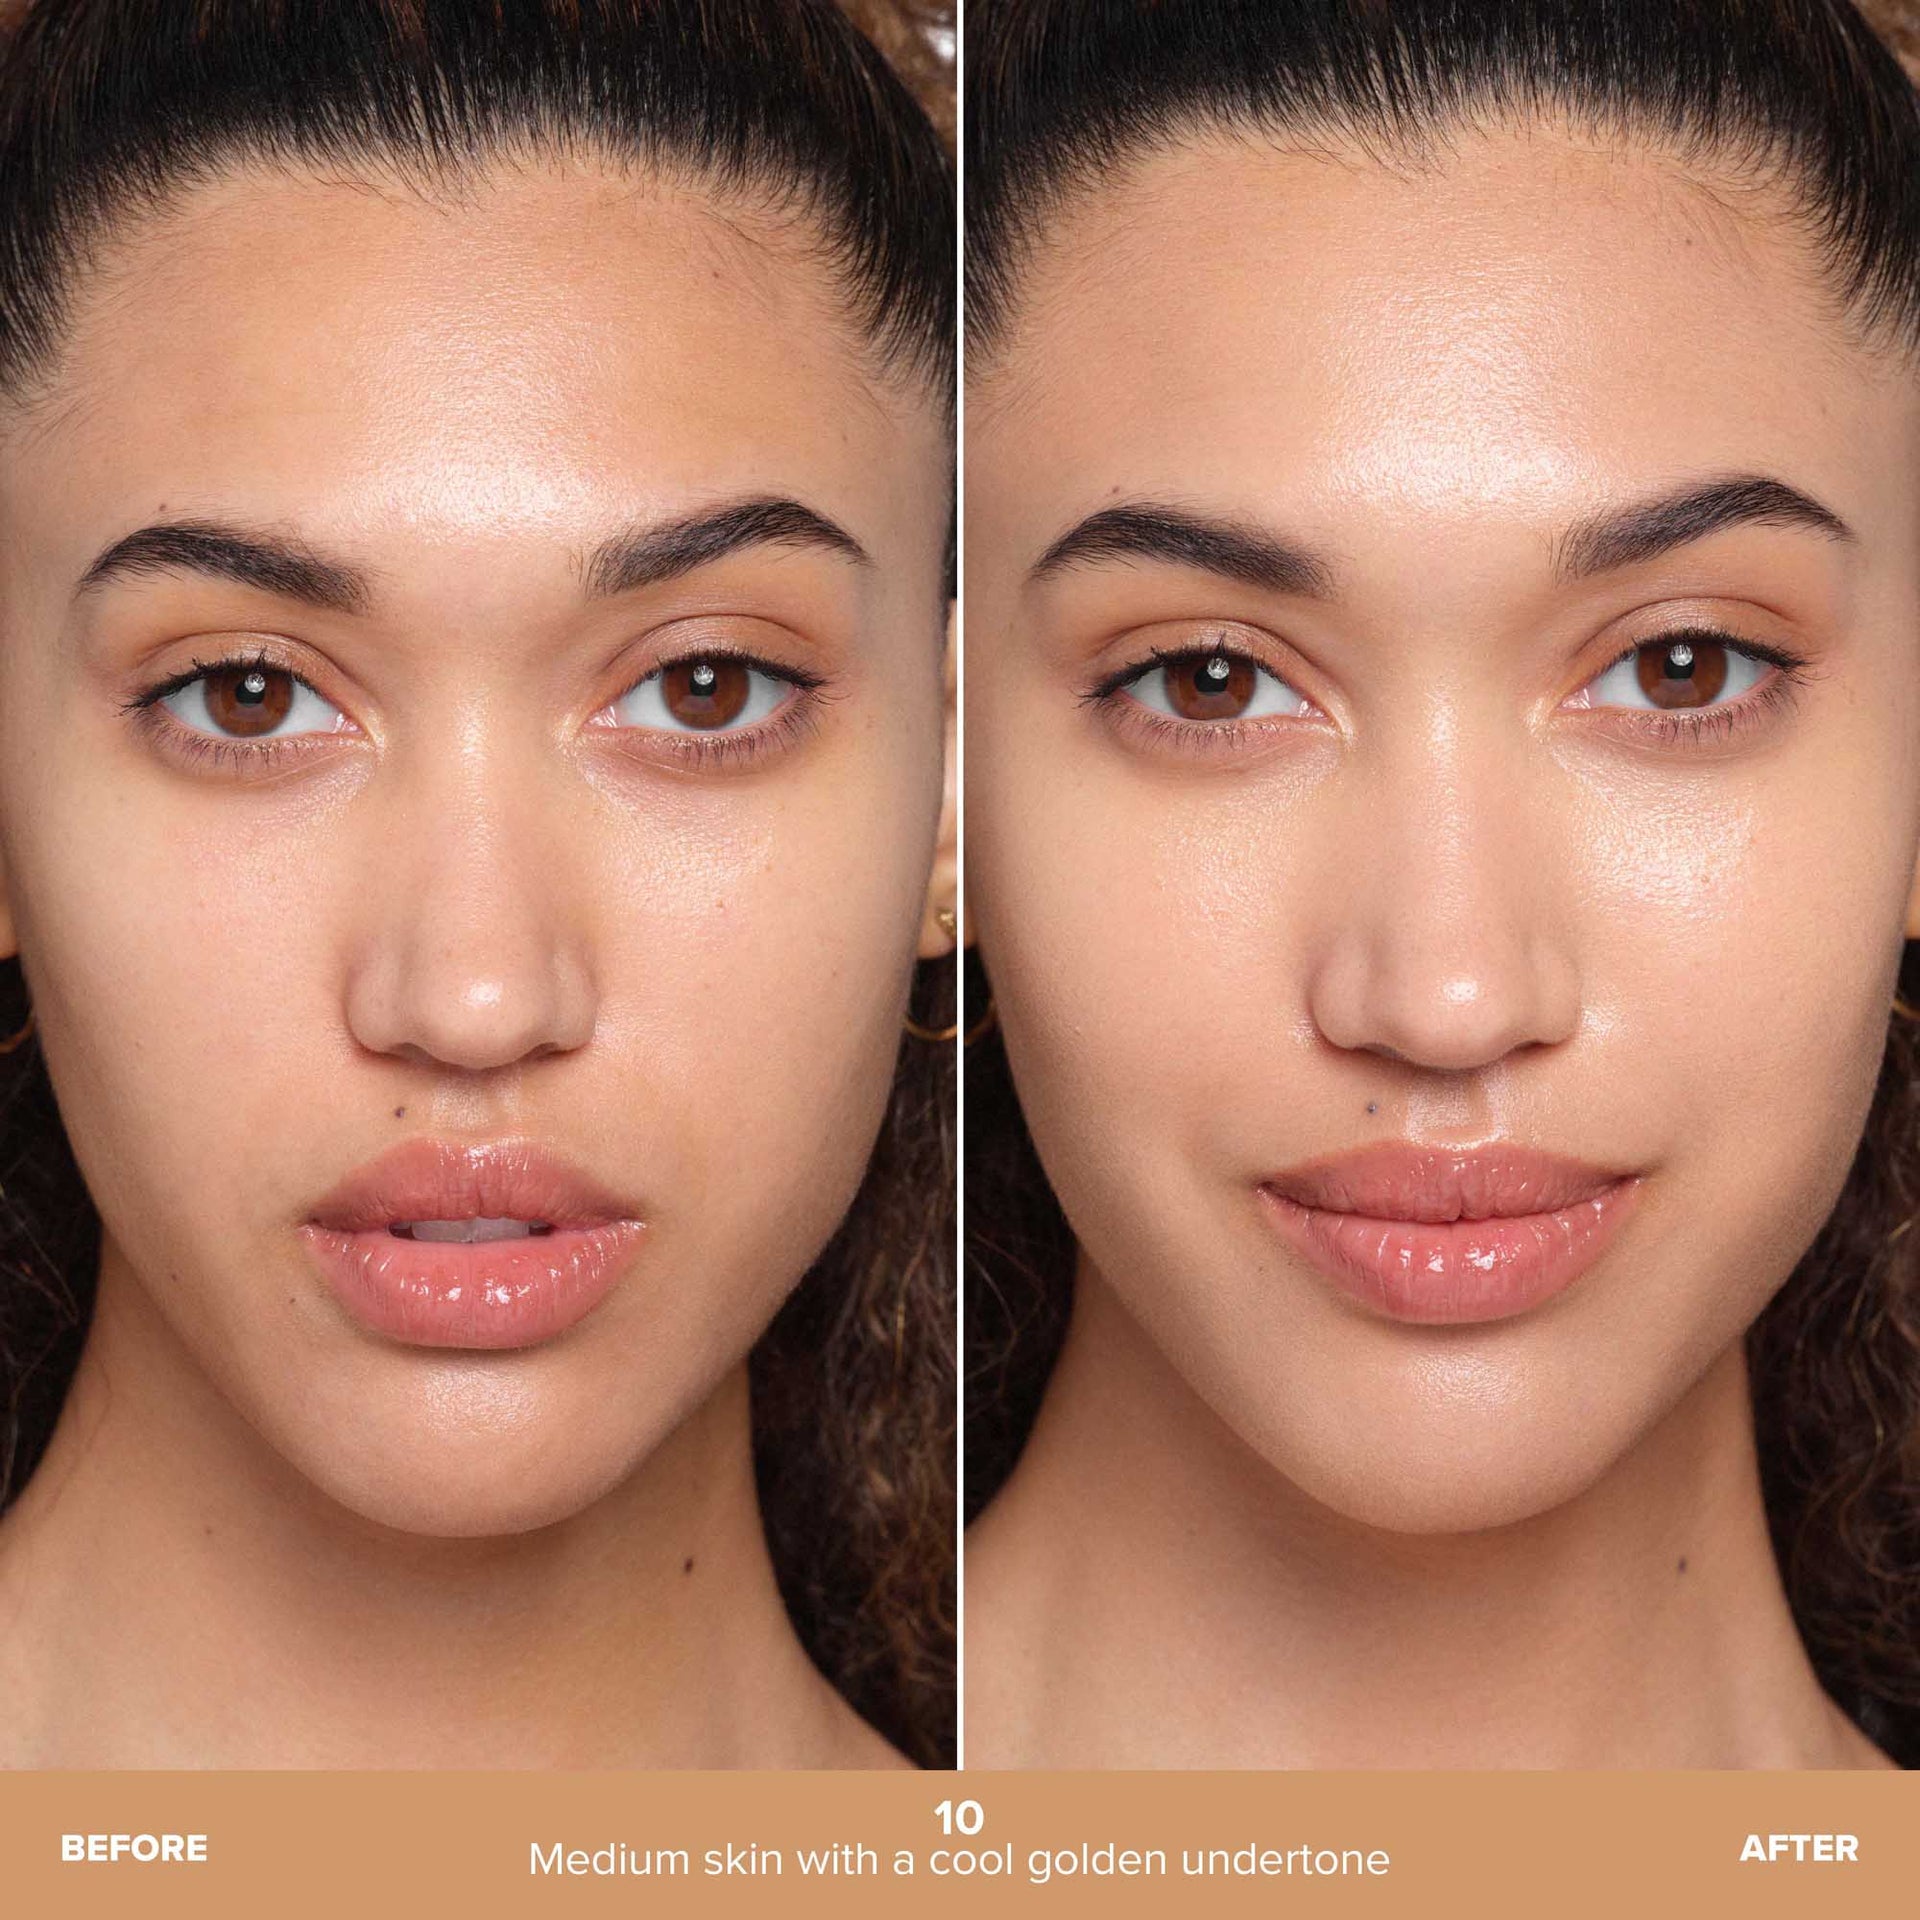 Shade 10 | Beauty Balm Serum Boosted Skin Tint Before & After - Shade 10